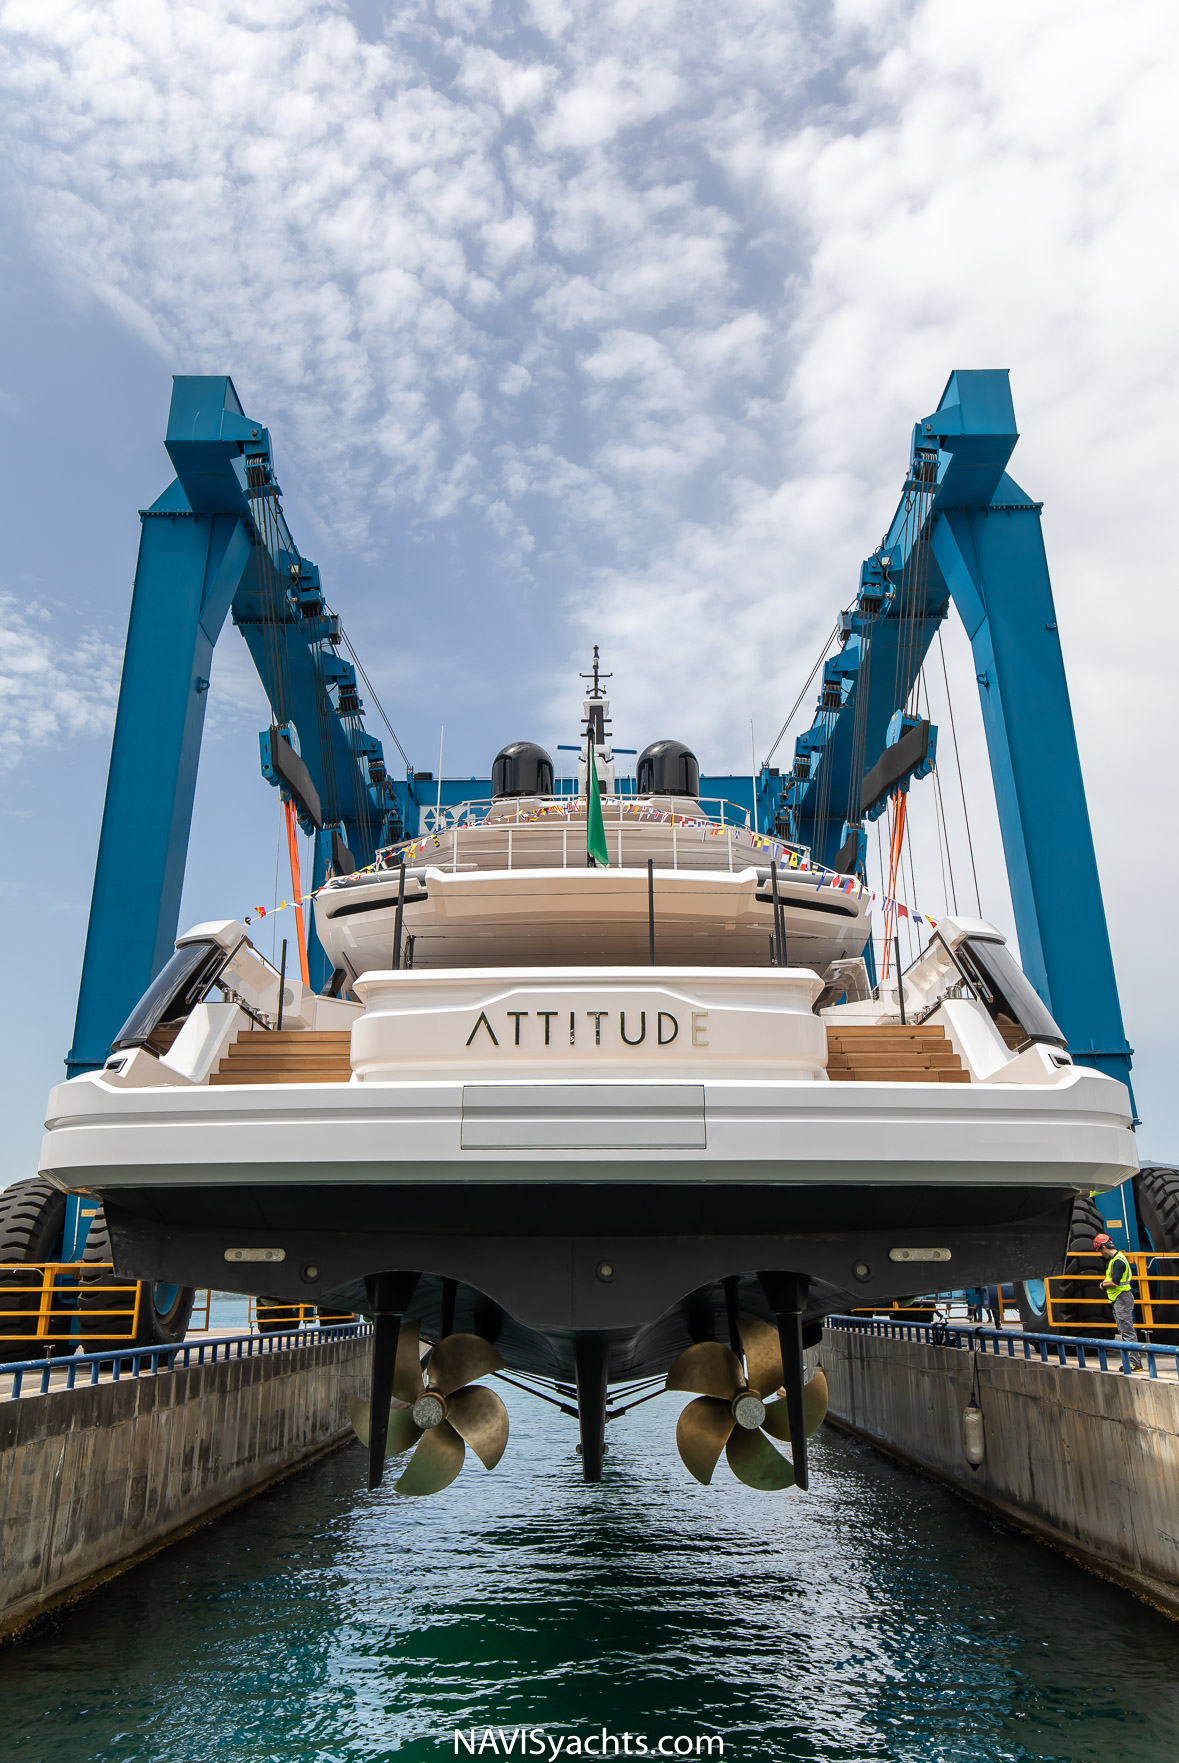 The new Baglietto 41 meter motor yacht, Attitude, has been launched.